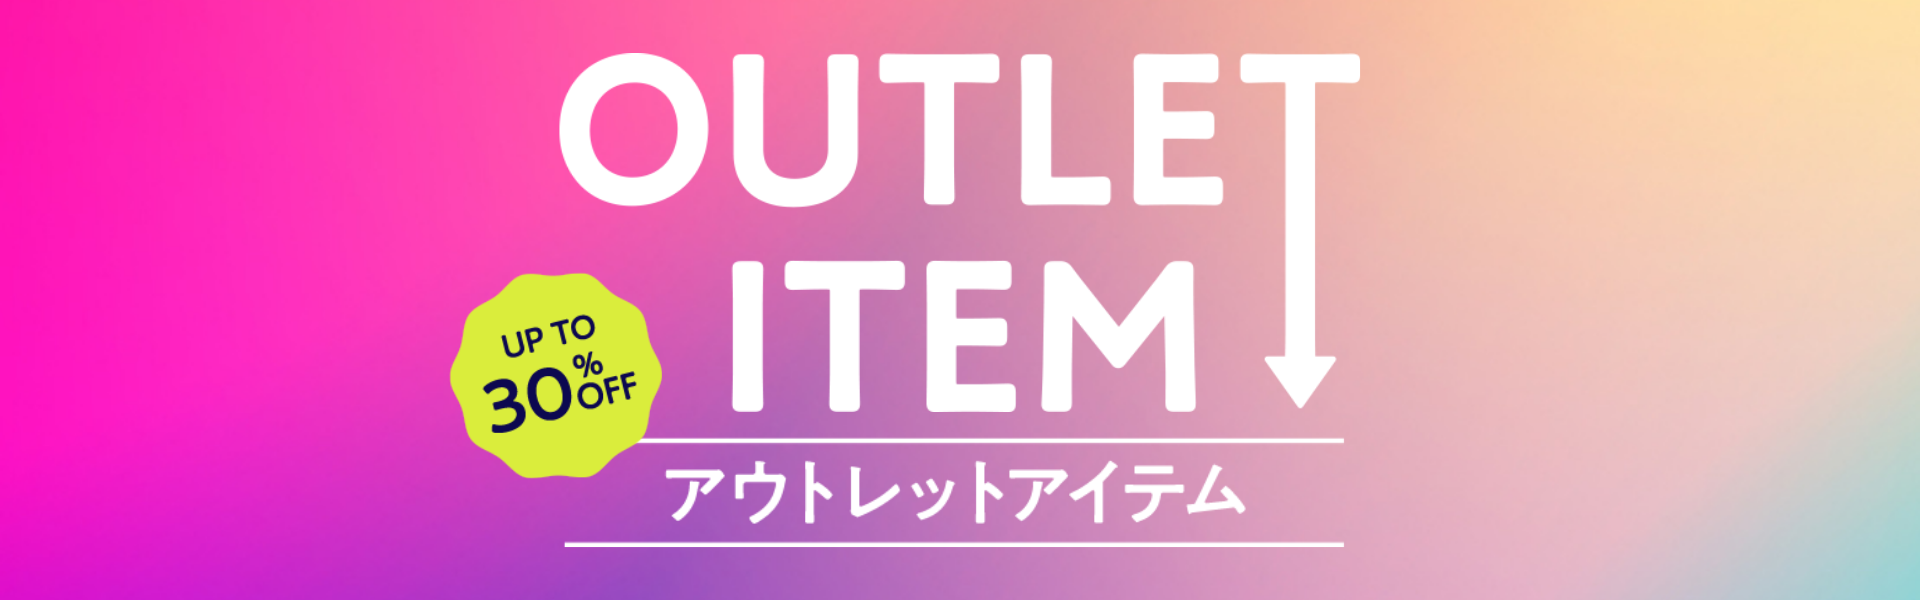 OUTLETヘッダー画像